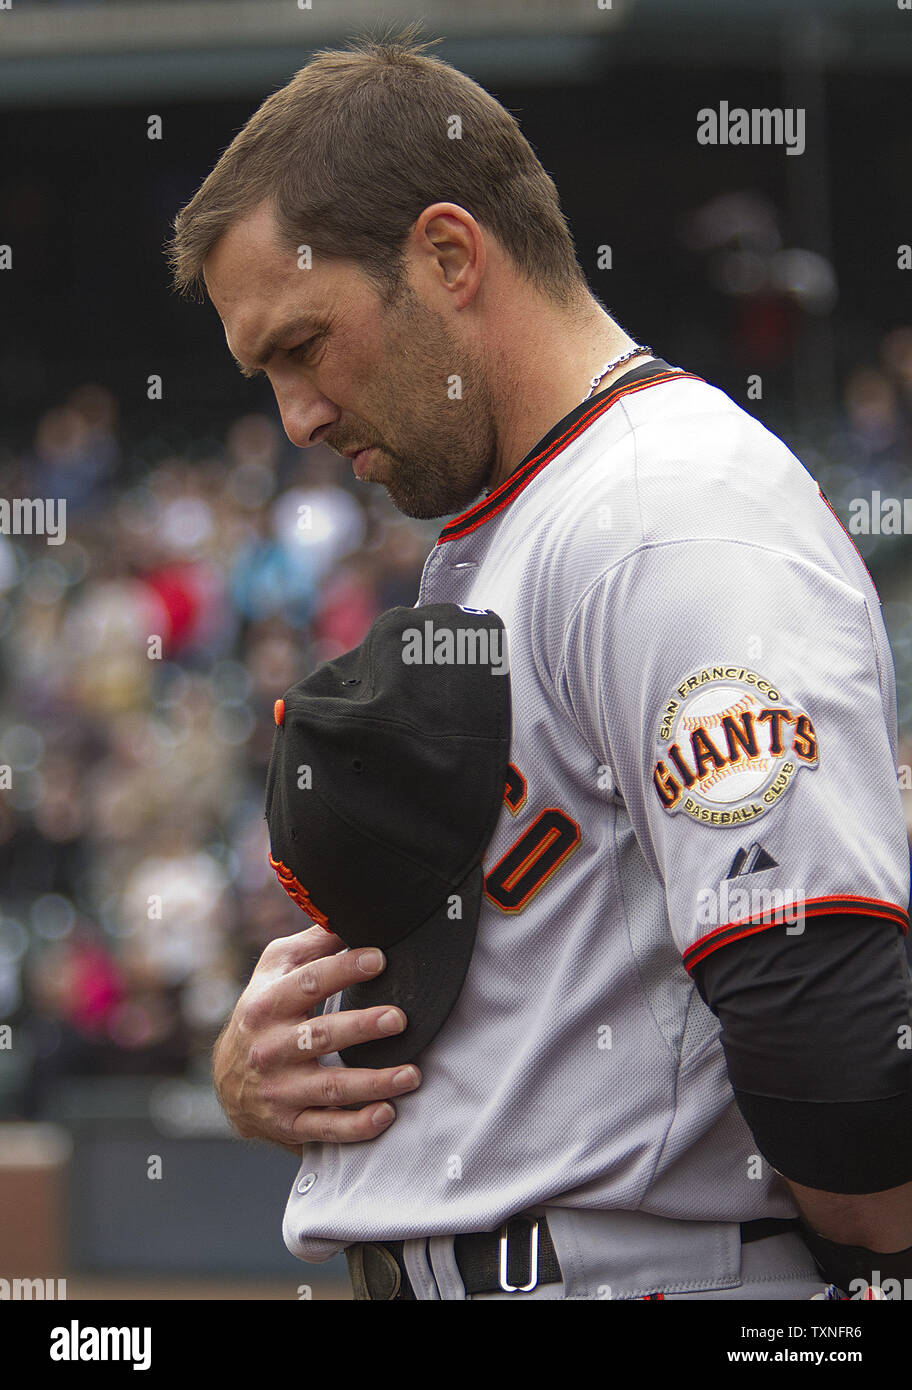 San Francisco Giants third baseman Mark DeRosa bows his head during a moment of silence for baseball great Harmon Killebrew at Coors Field in Denver on May 17, 2011.    UPI/Gary C. Caskey Stock Photo